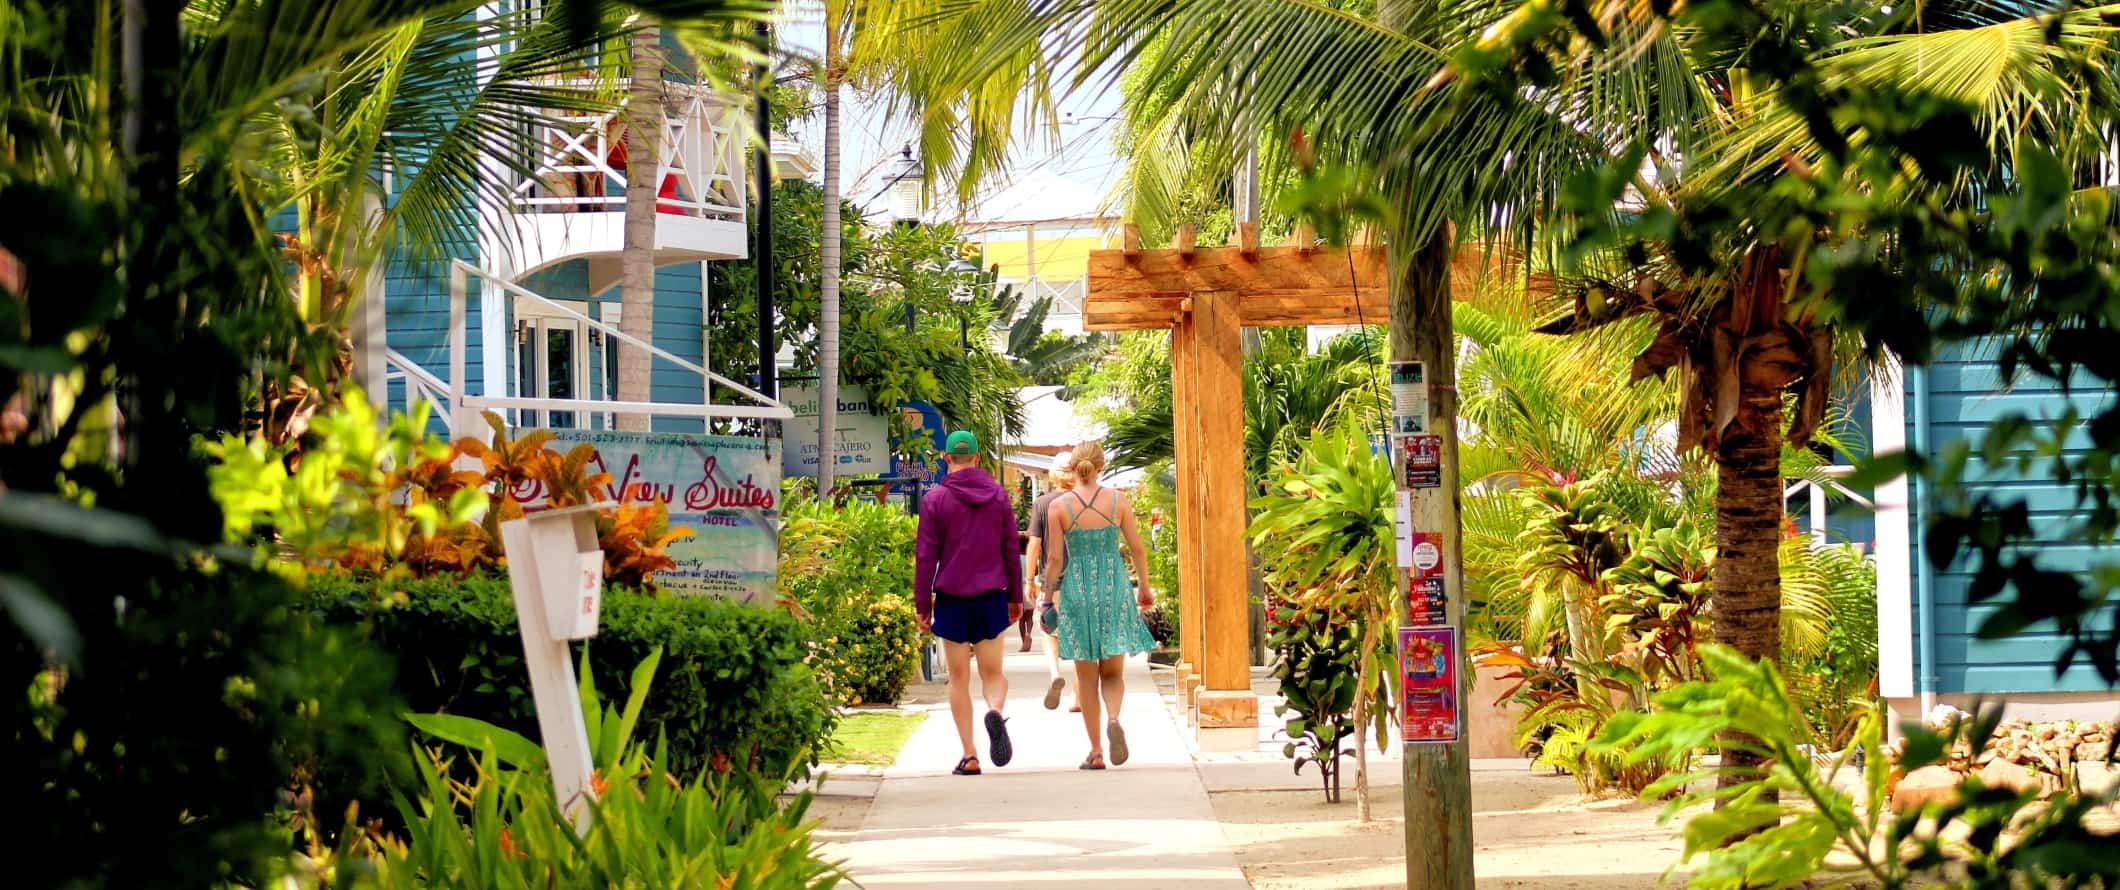 Tourists walking down a sidewalk lined with lush palms in Placencia, Belize